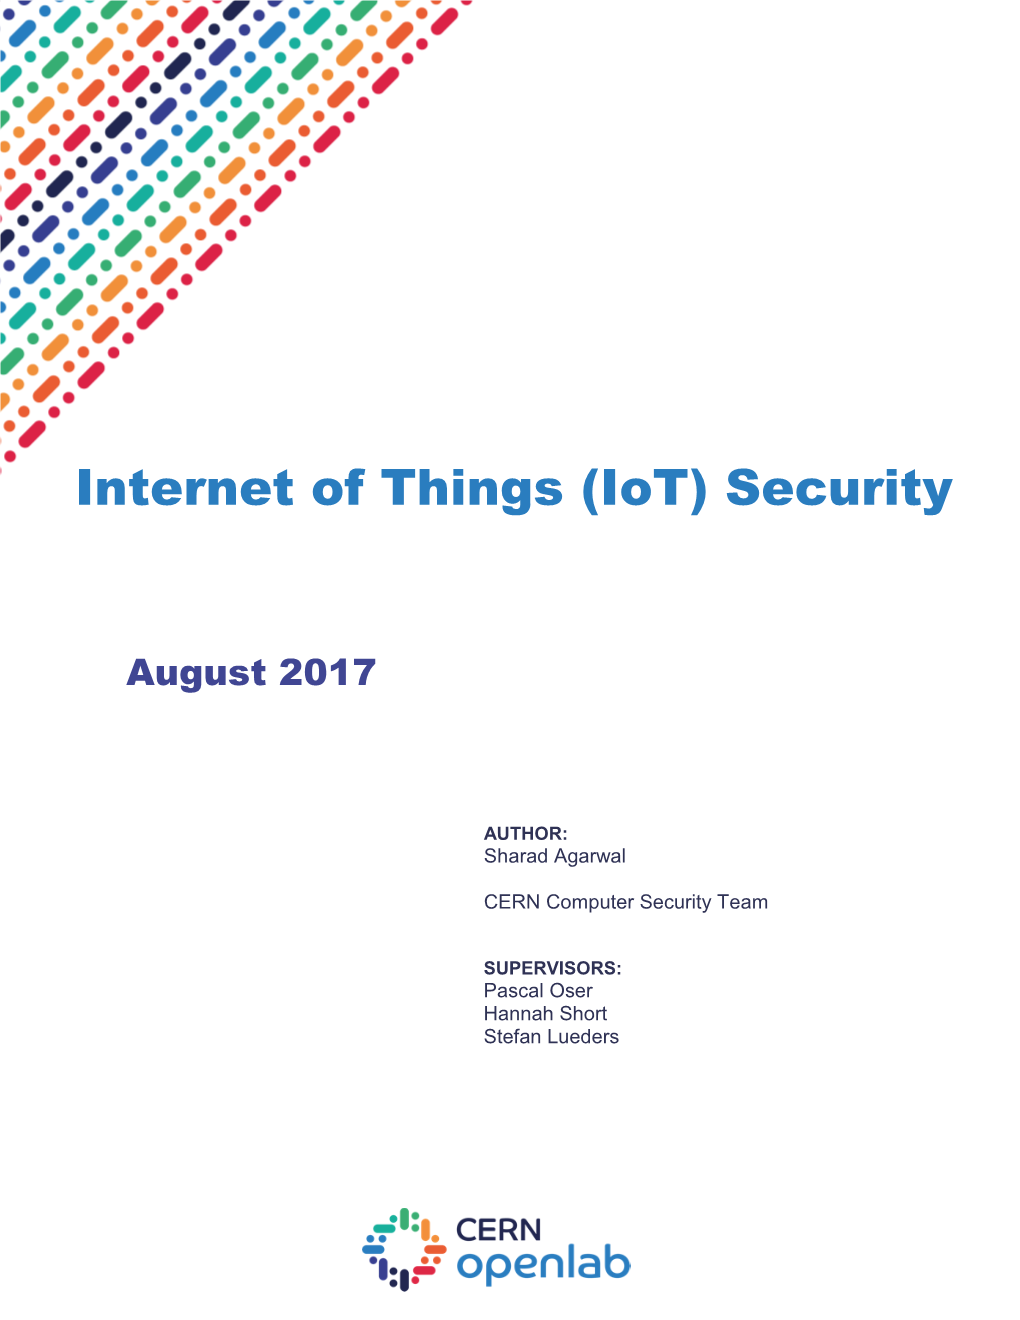 Internet of Things (Iot) Security